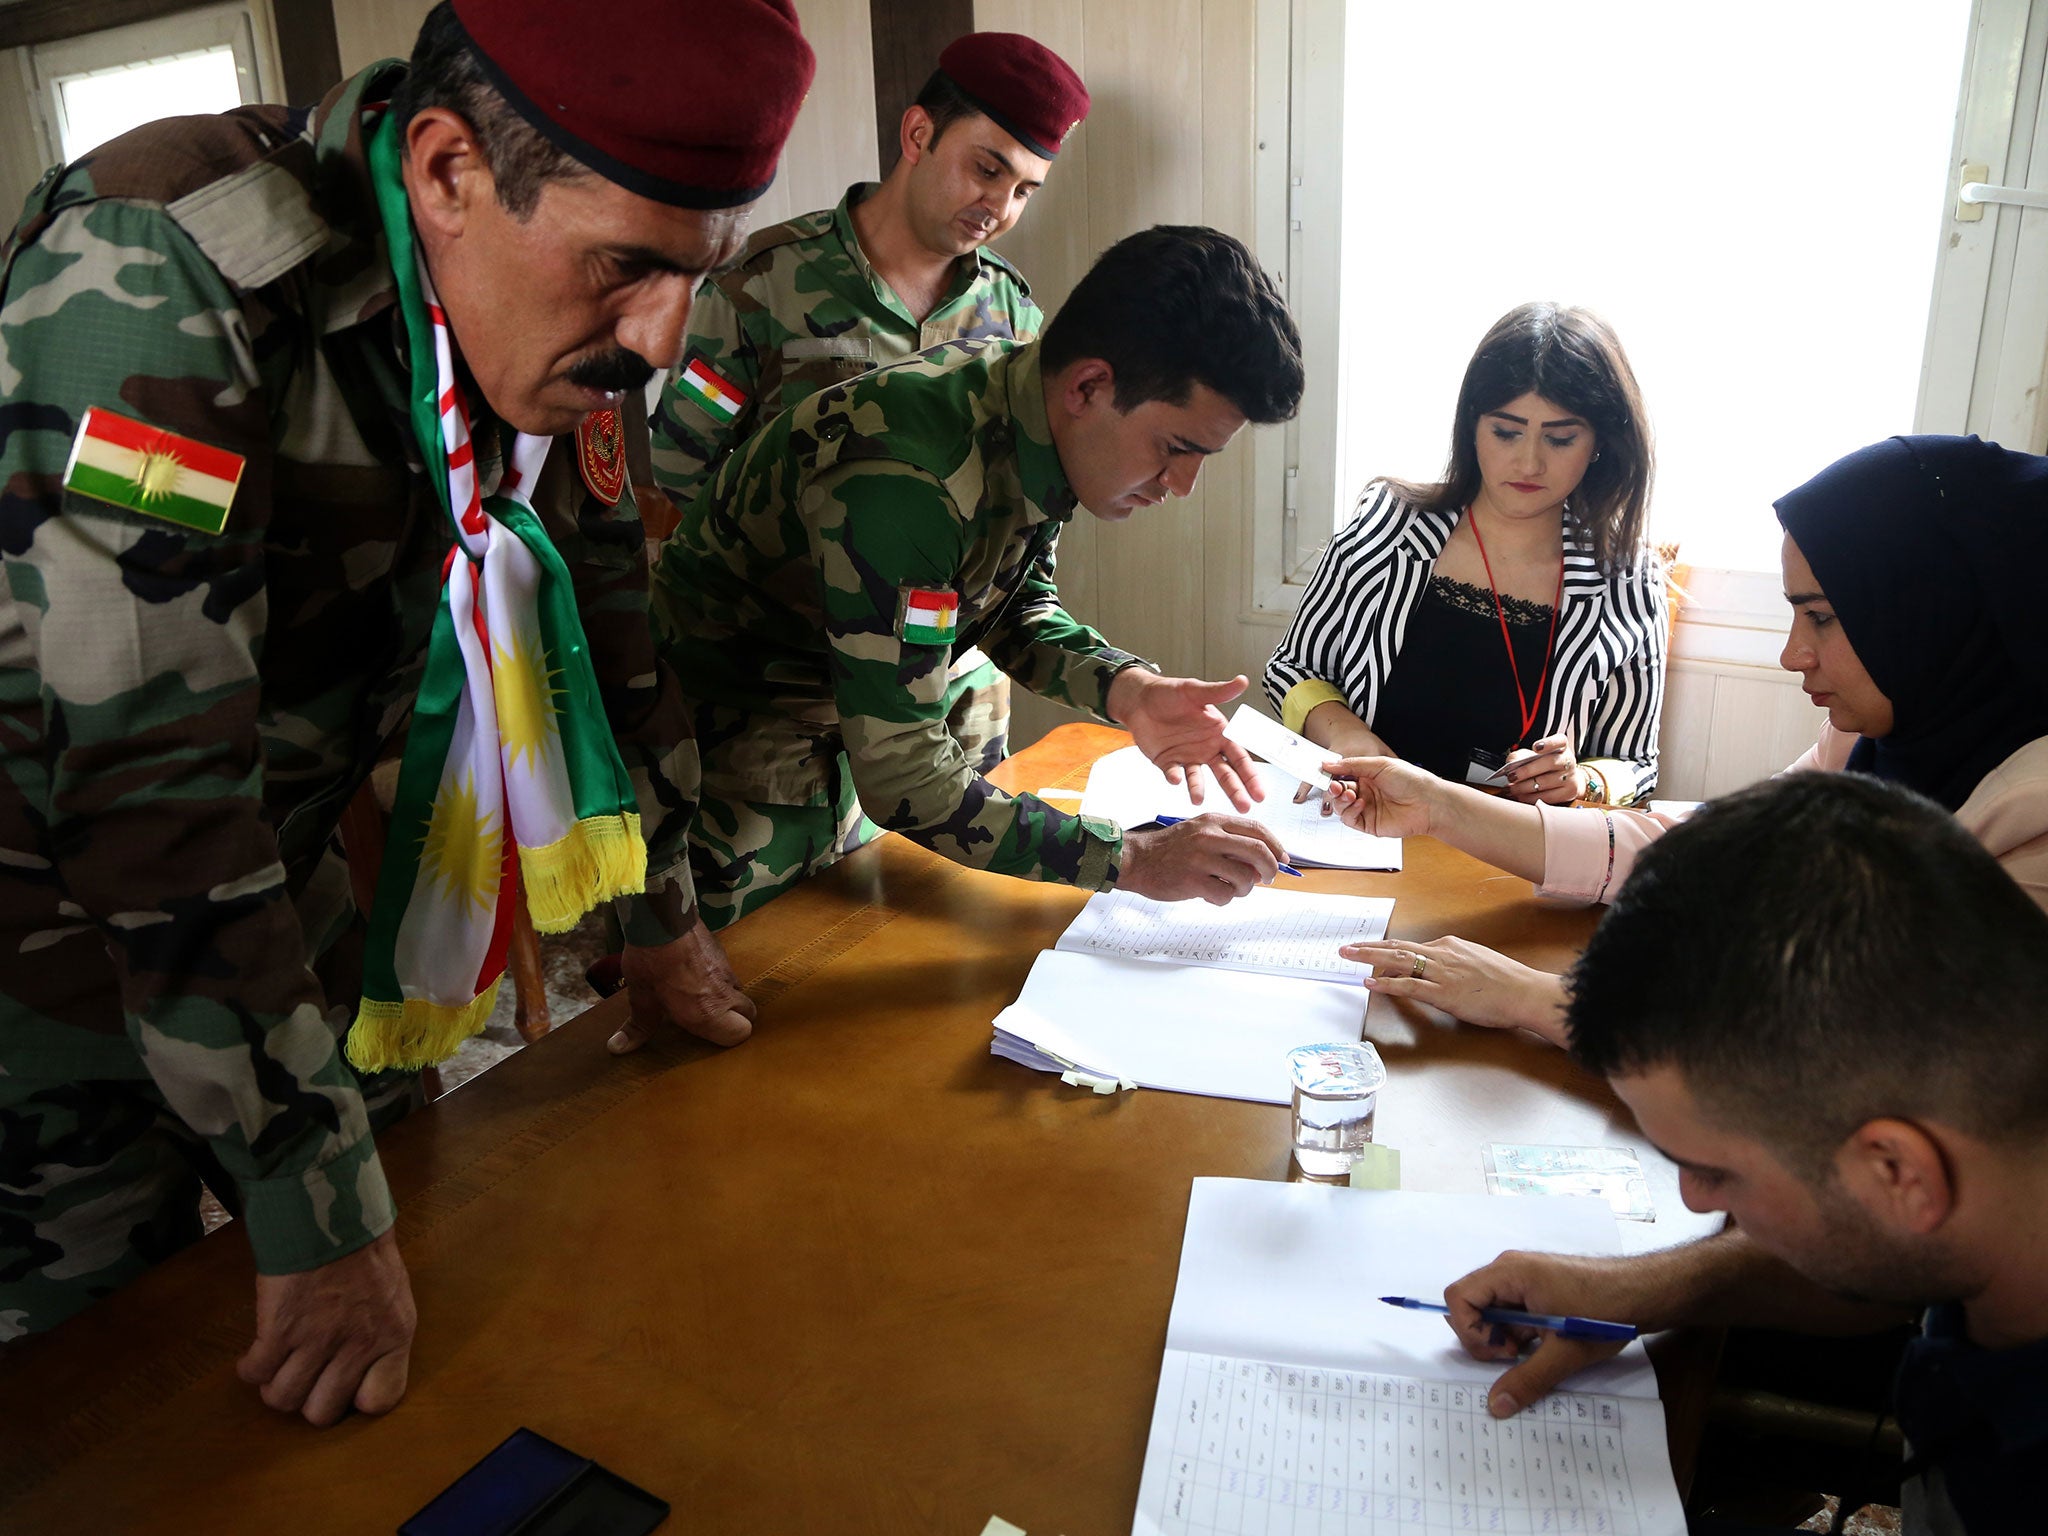 Over 92 per cent of votes were cast for independence in the Kurdish referendum